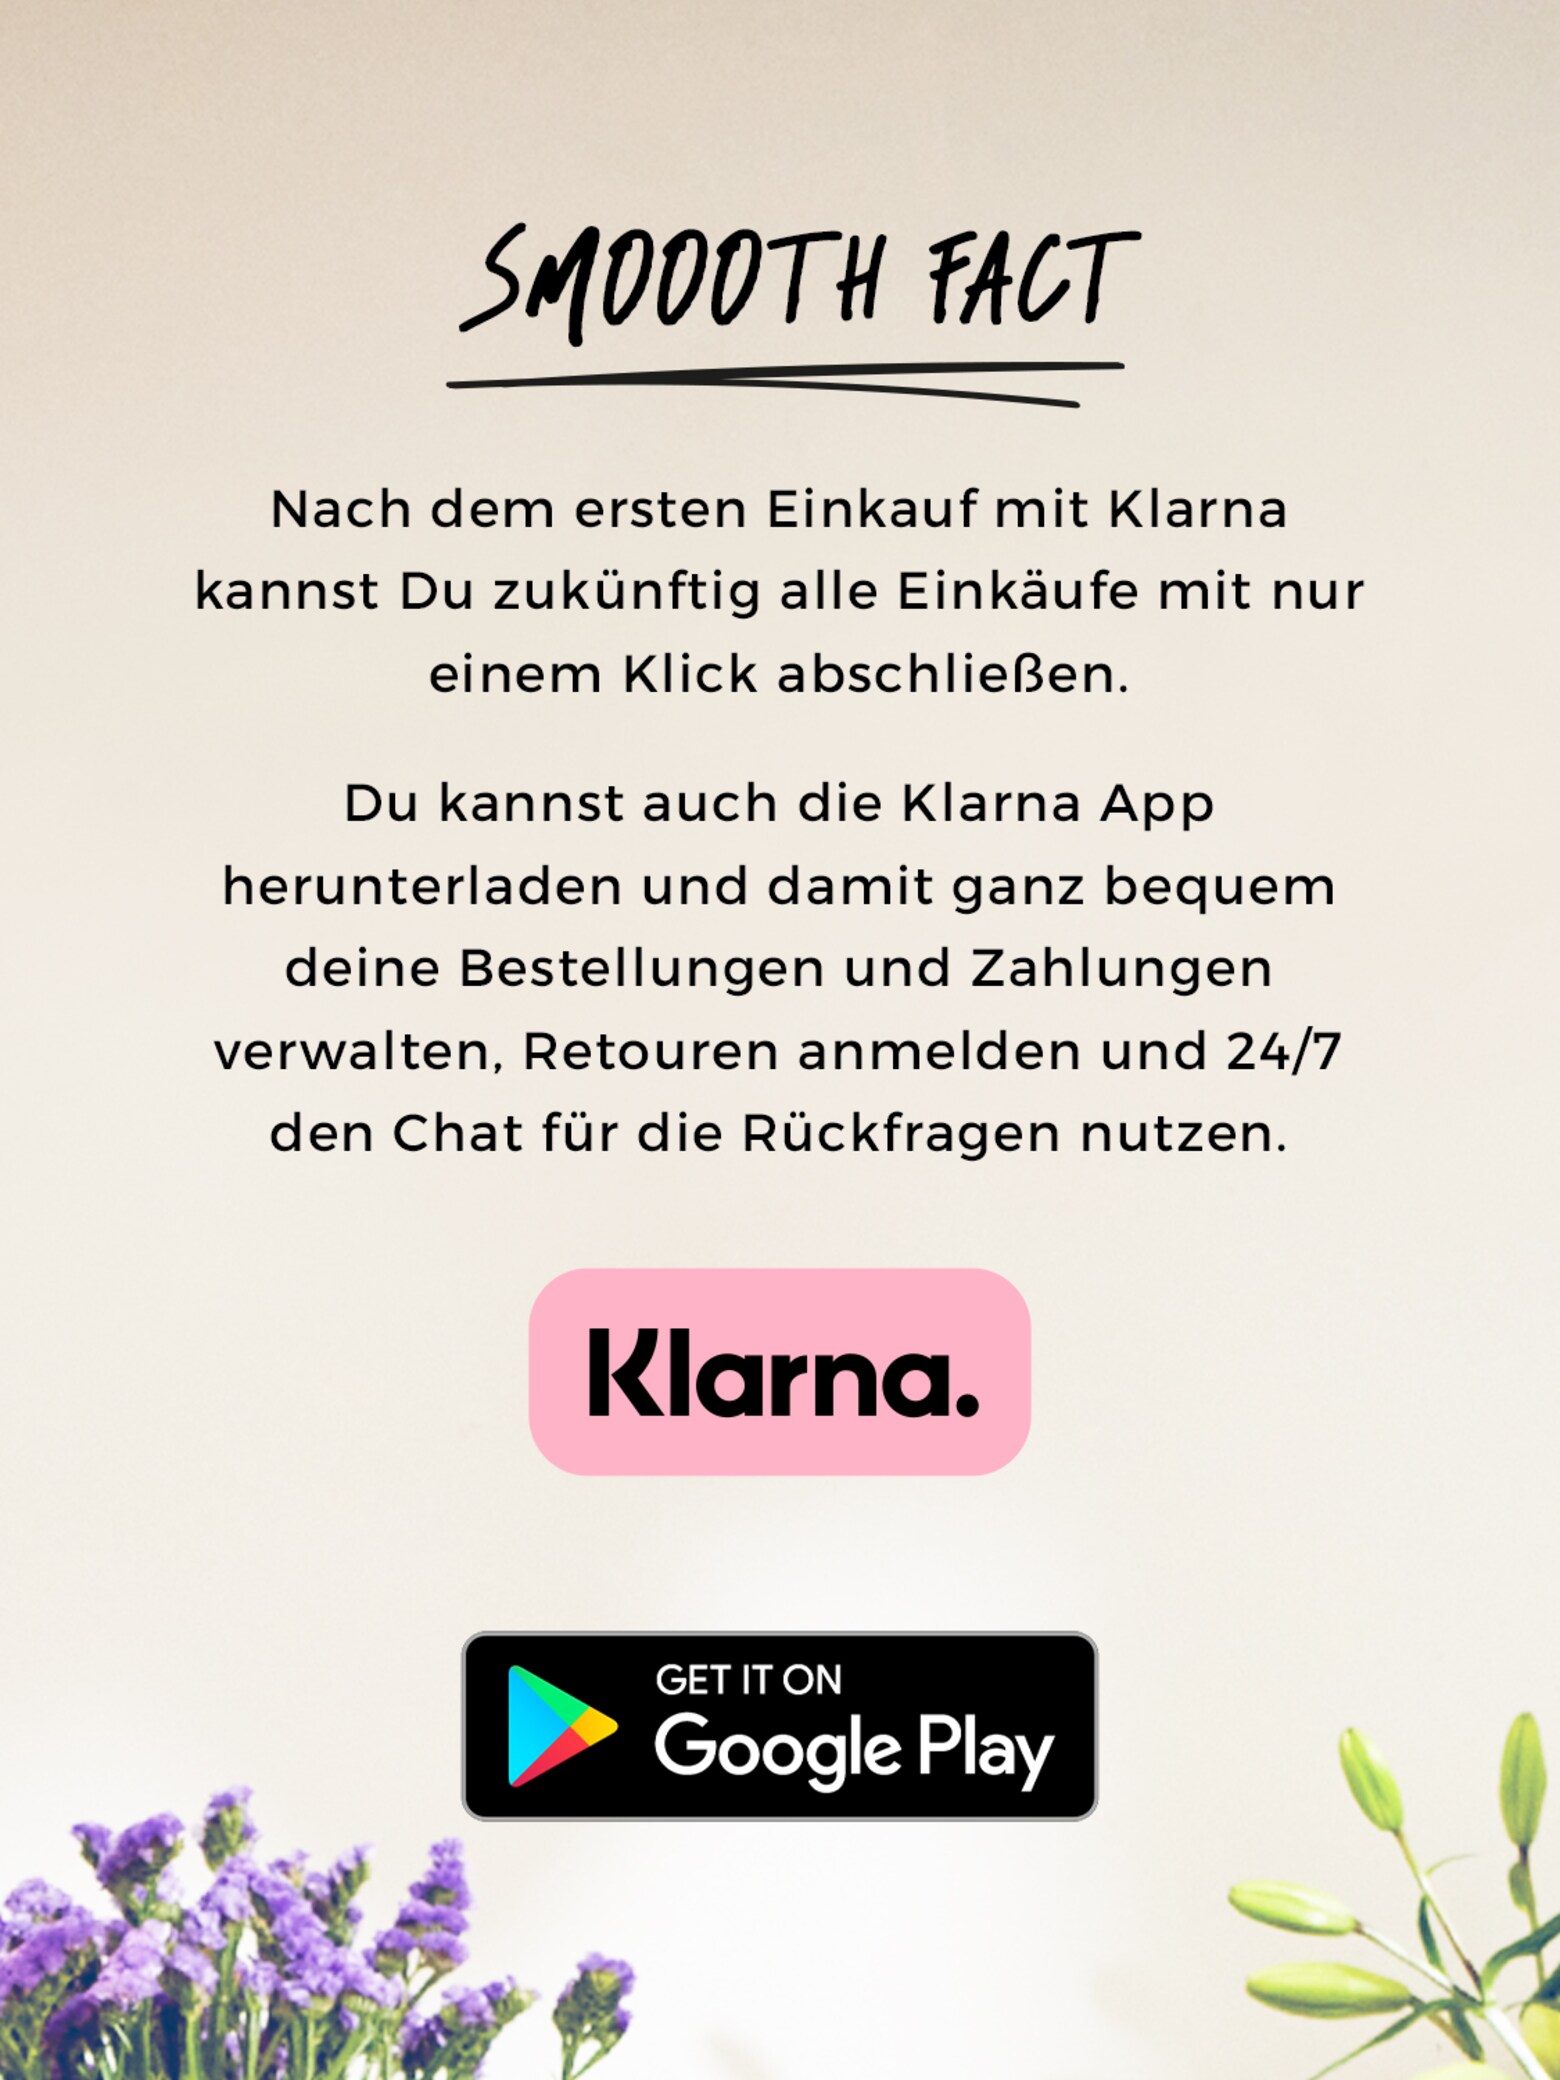 Dein smoooth Shopping-Guide About You x Klarna